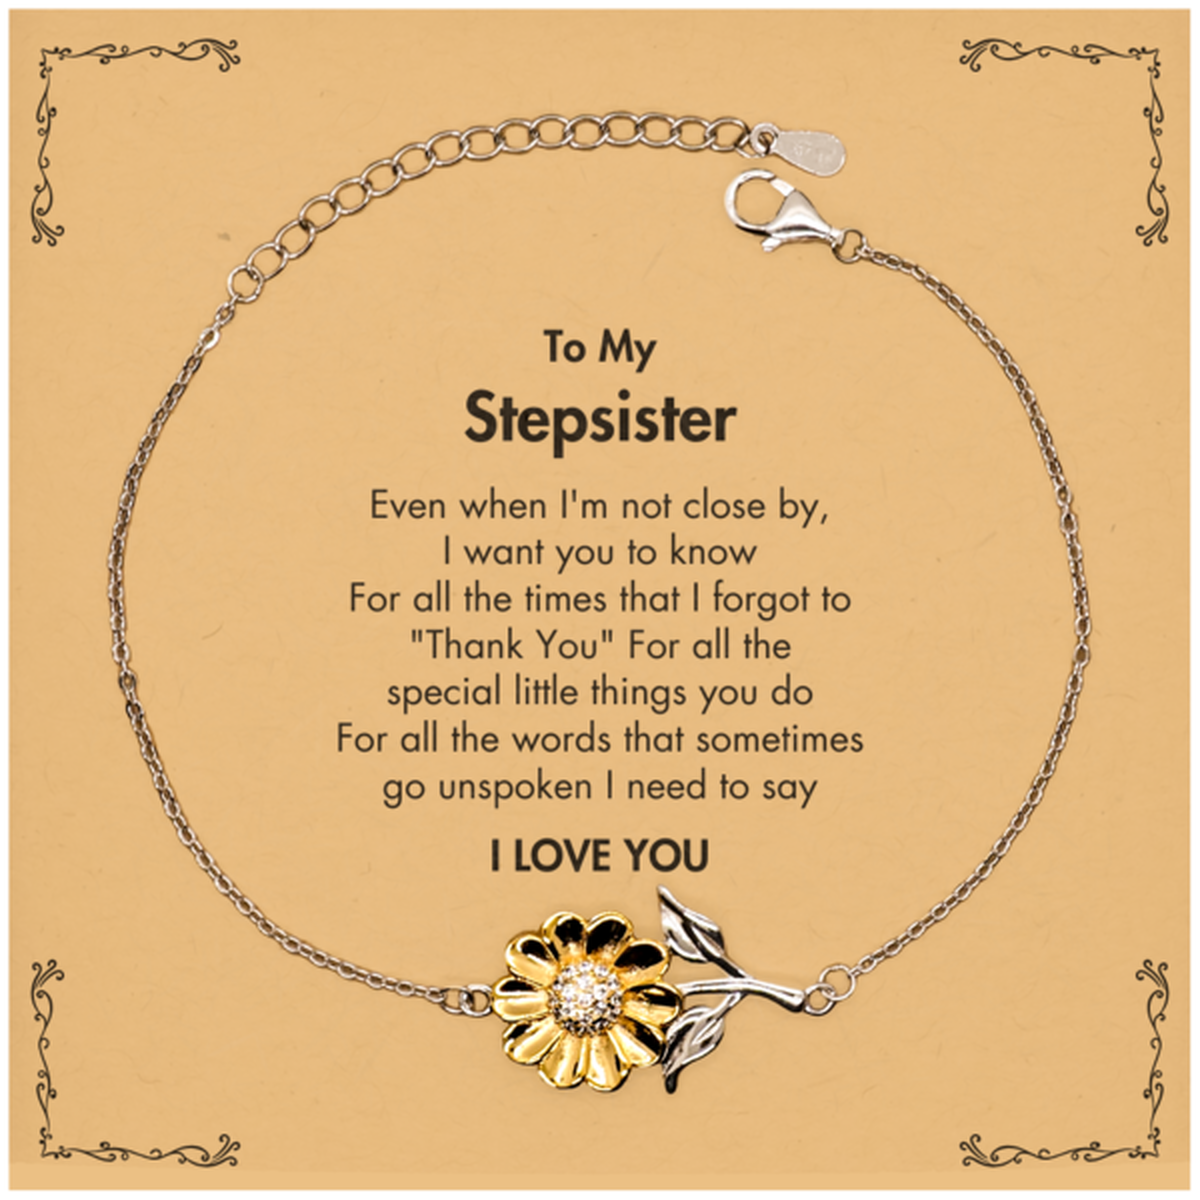 Thank You Gifts for Stepsister, Keepsake Sunflower Bracelet Gifts for Stepsister Birthday Mother's day Father's Day Stepsister For all the words That sometimes go unspoken I need to say I LOVE YOU